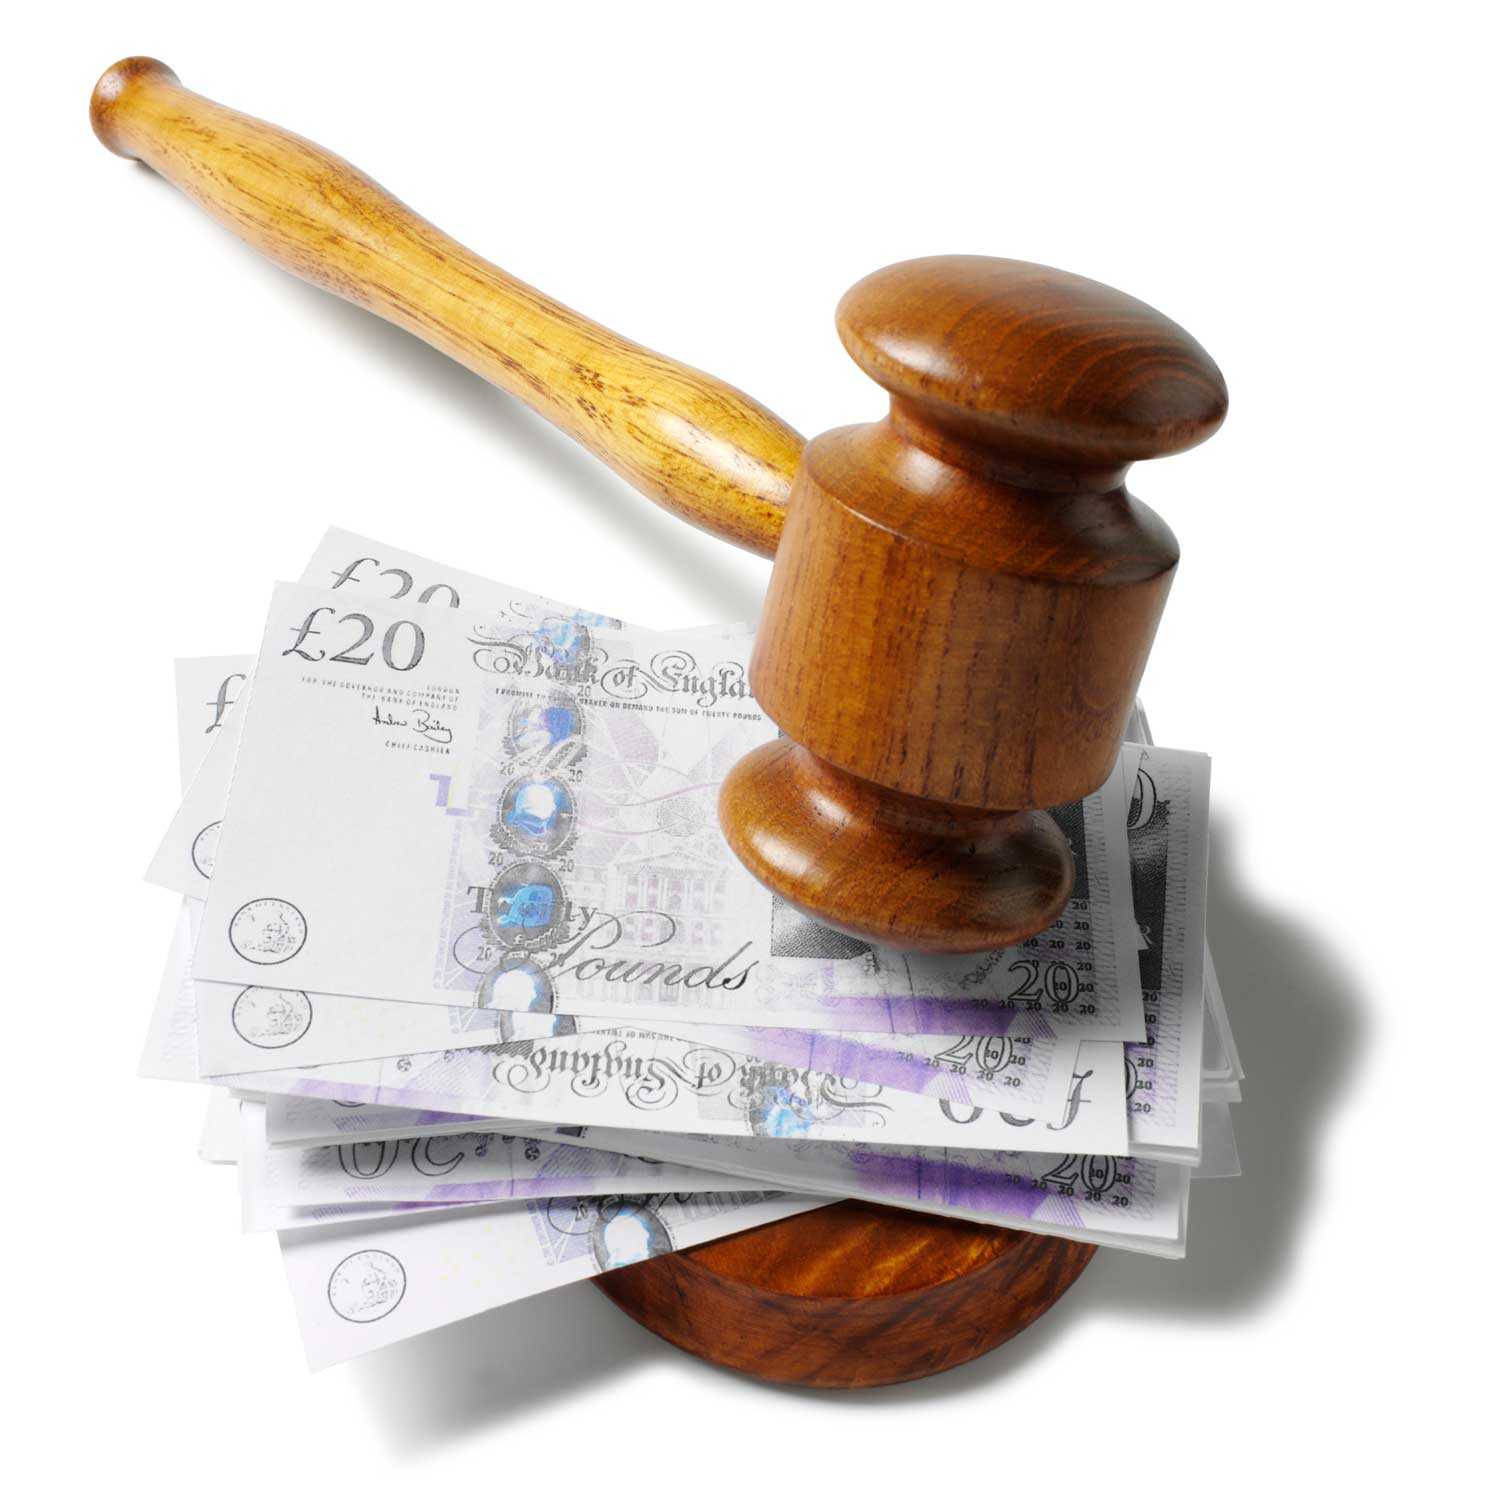 Landlord fined after failing to improve property he was renting out